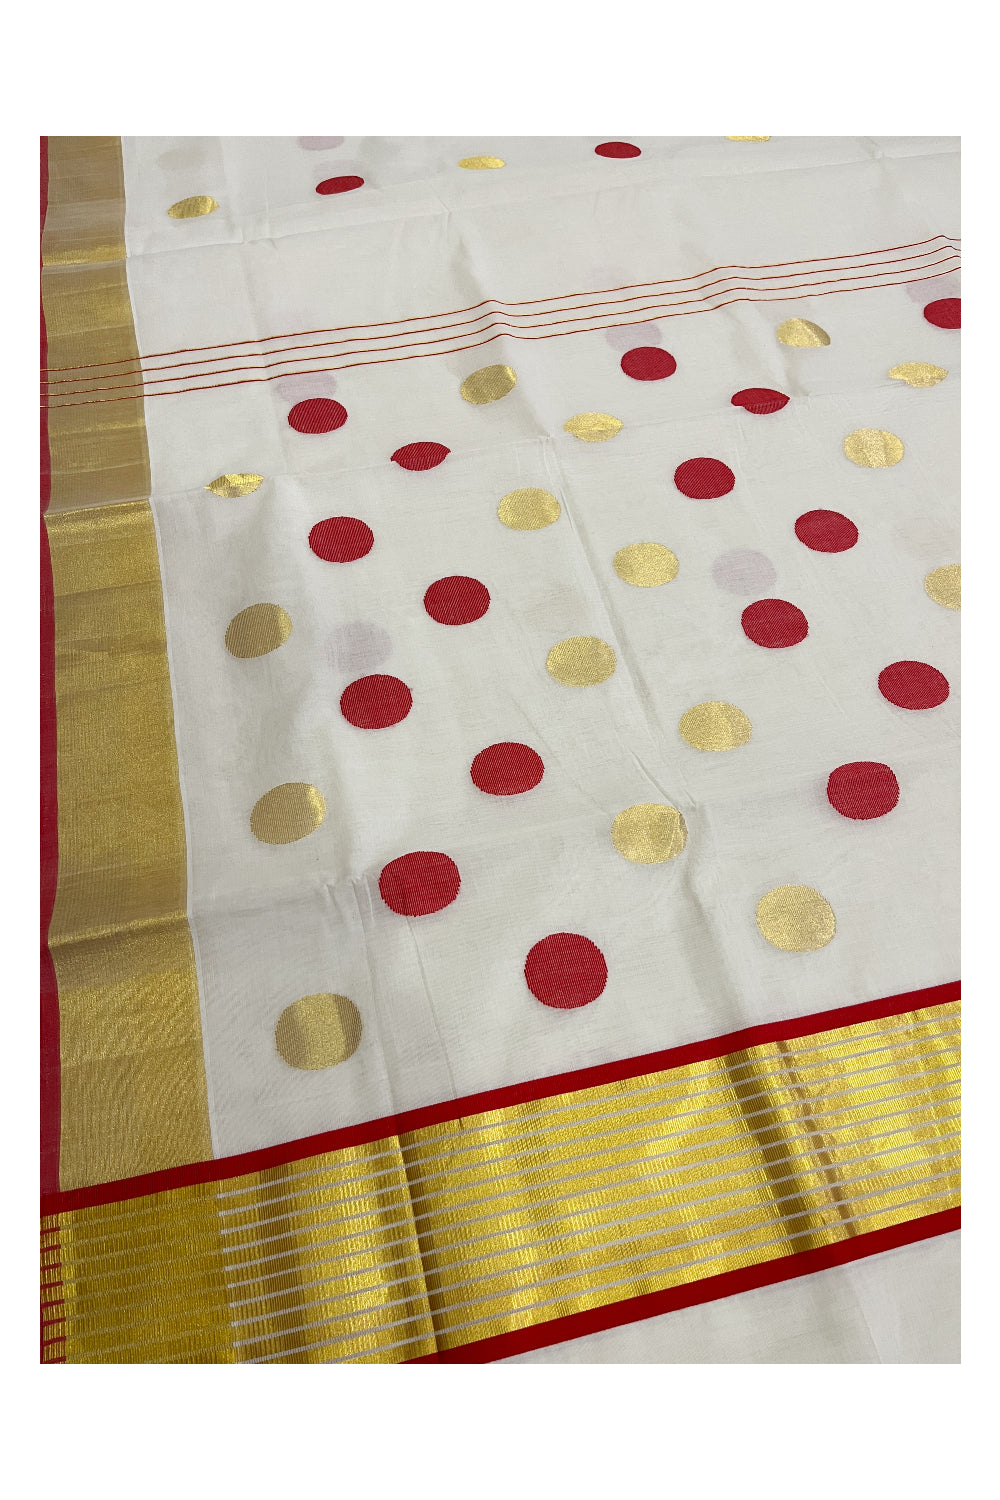 Southloom™ Premium Handloom Cotton Kerala Saree with Golden and Red Polka works on Body